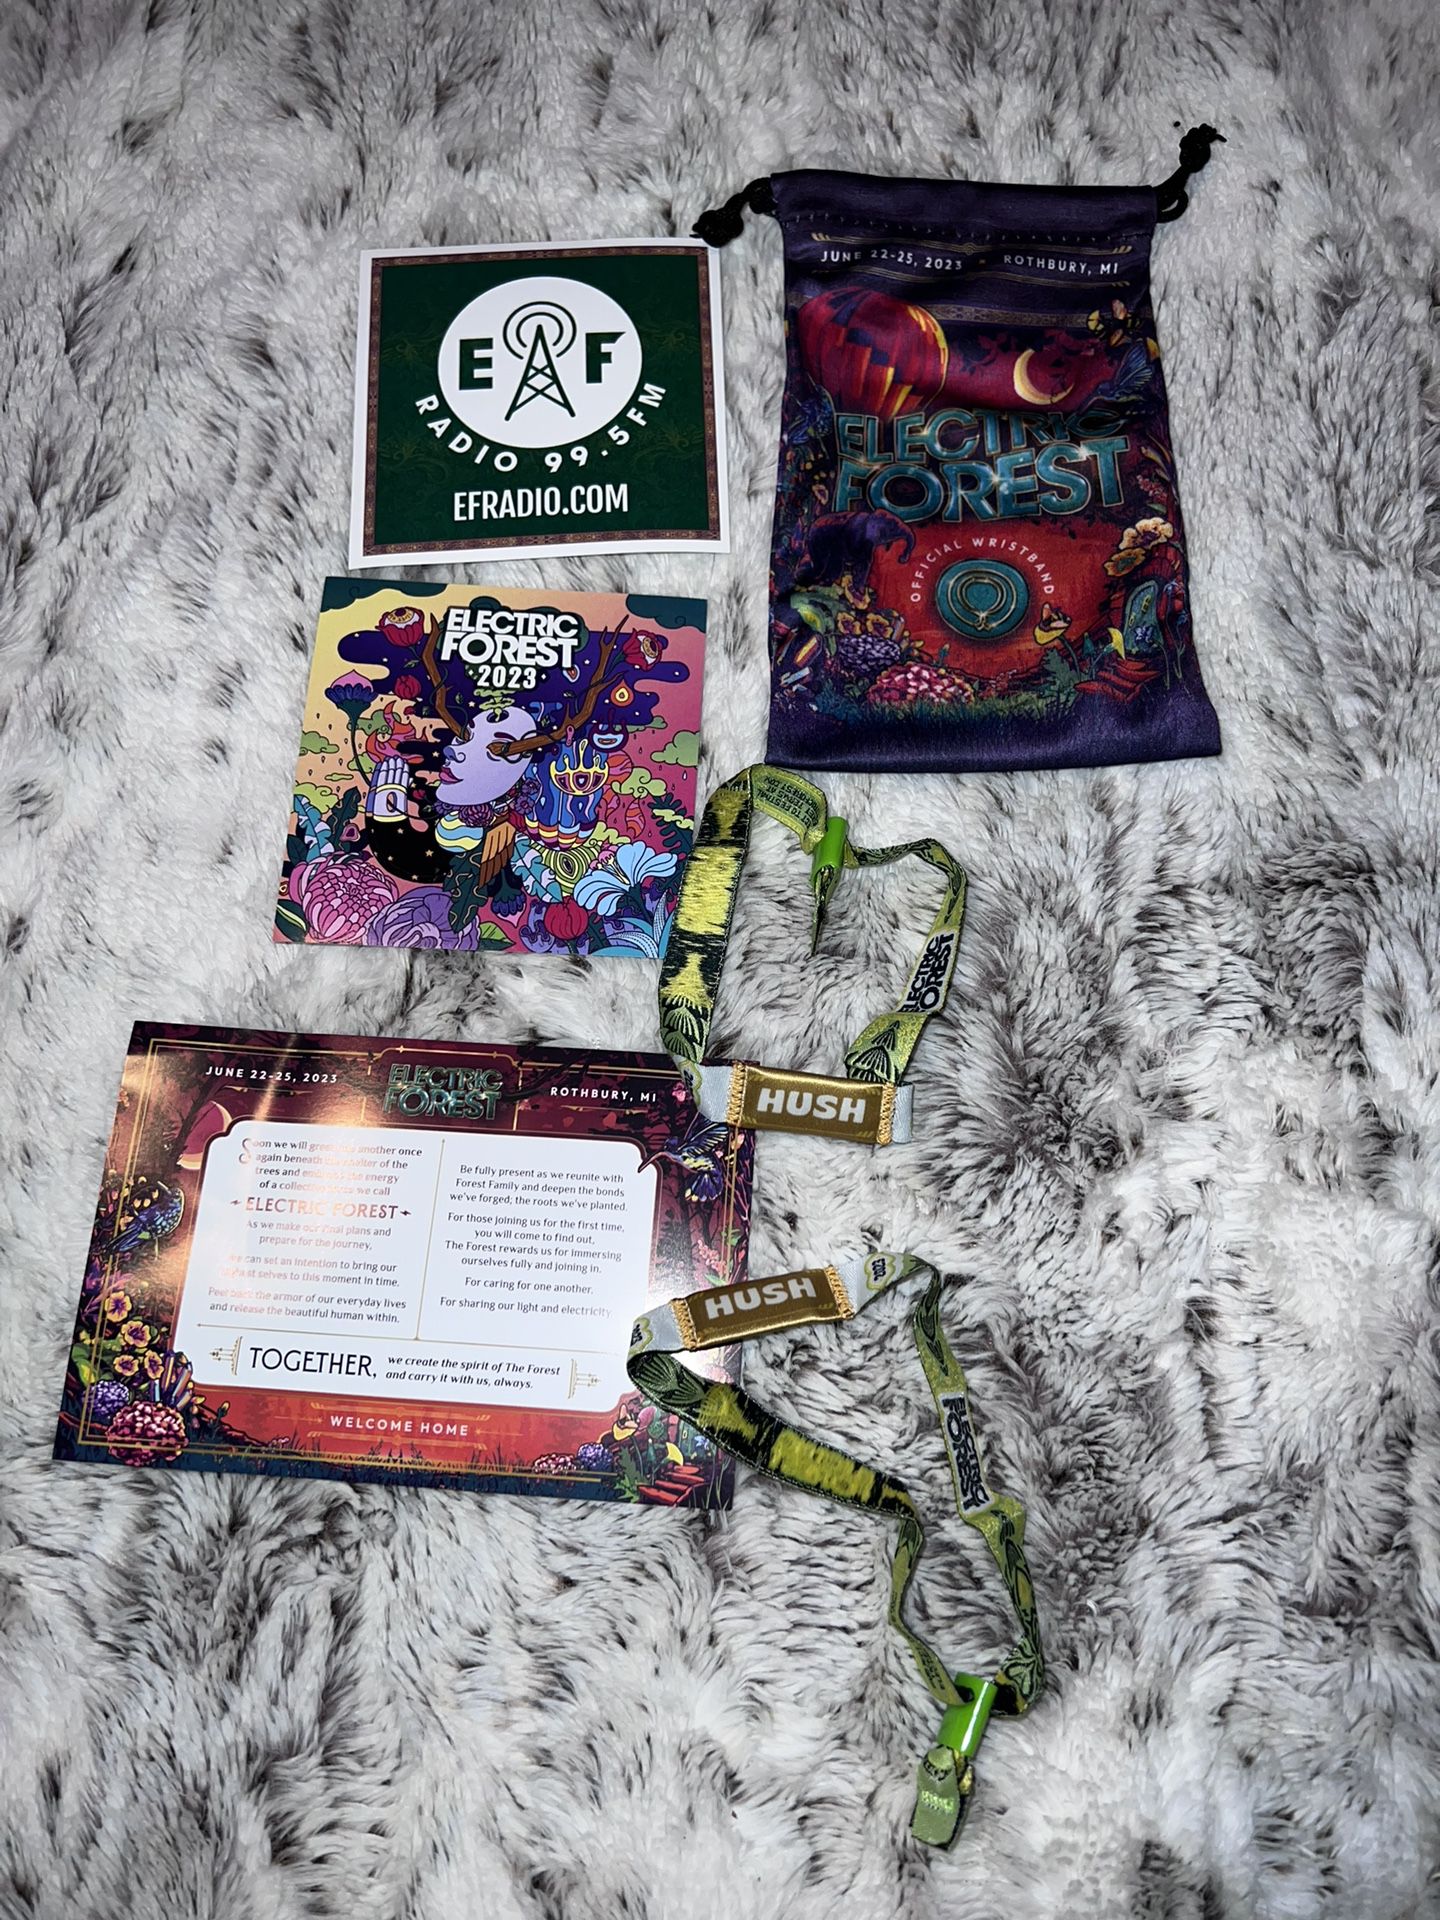 Electric Forest Tickets 4 Sale